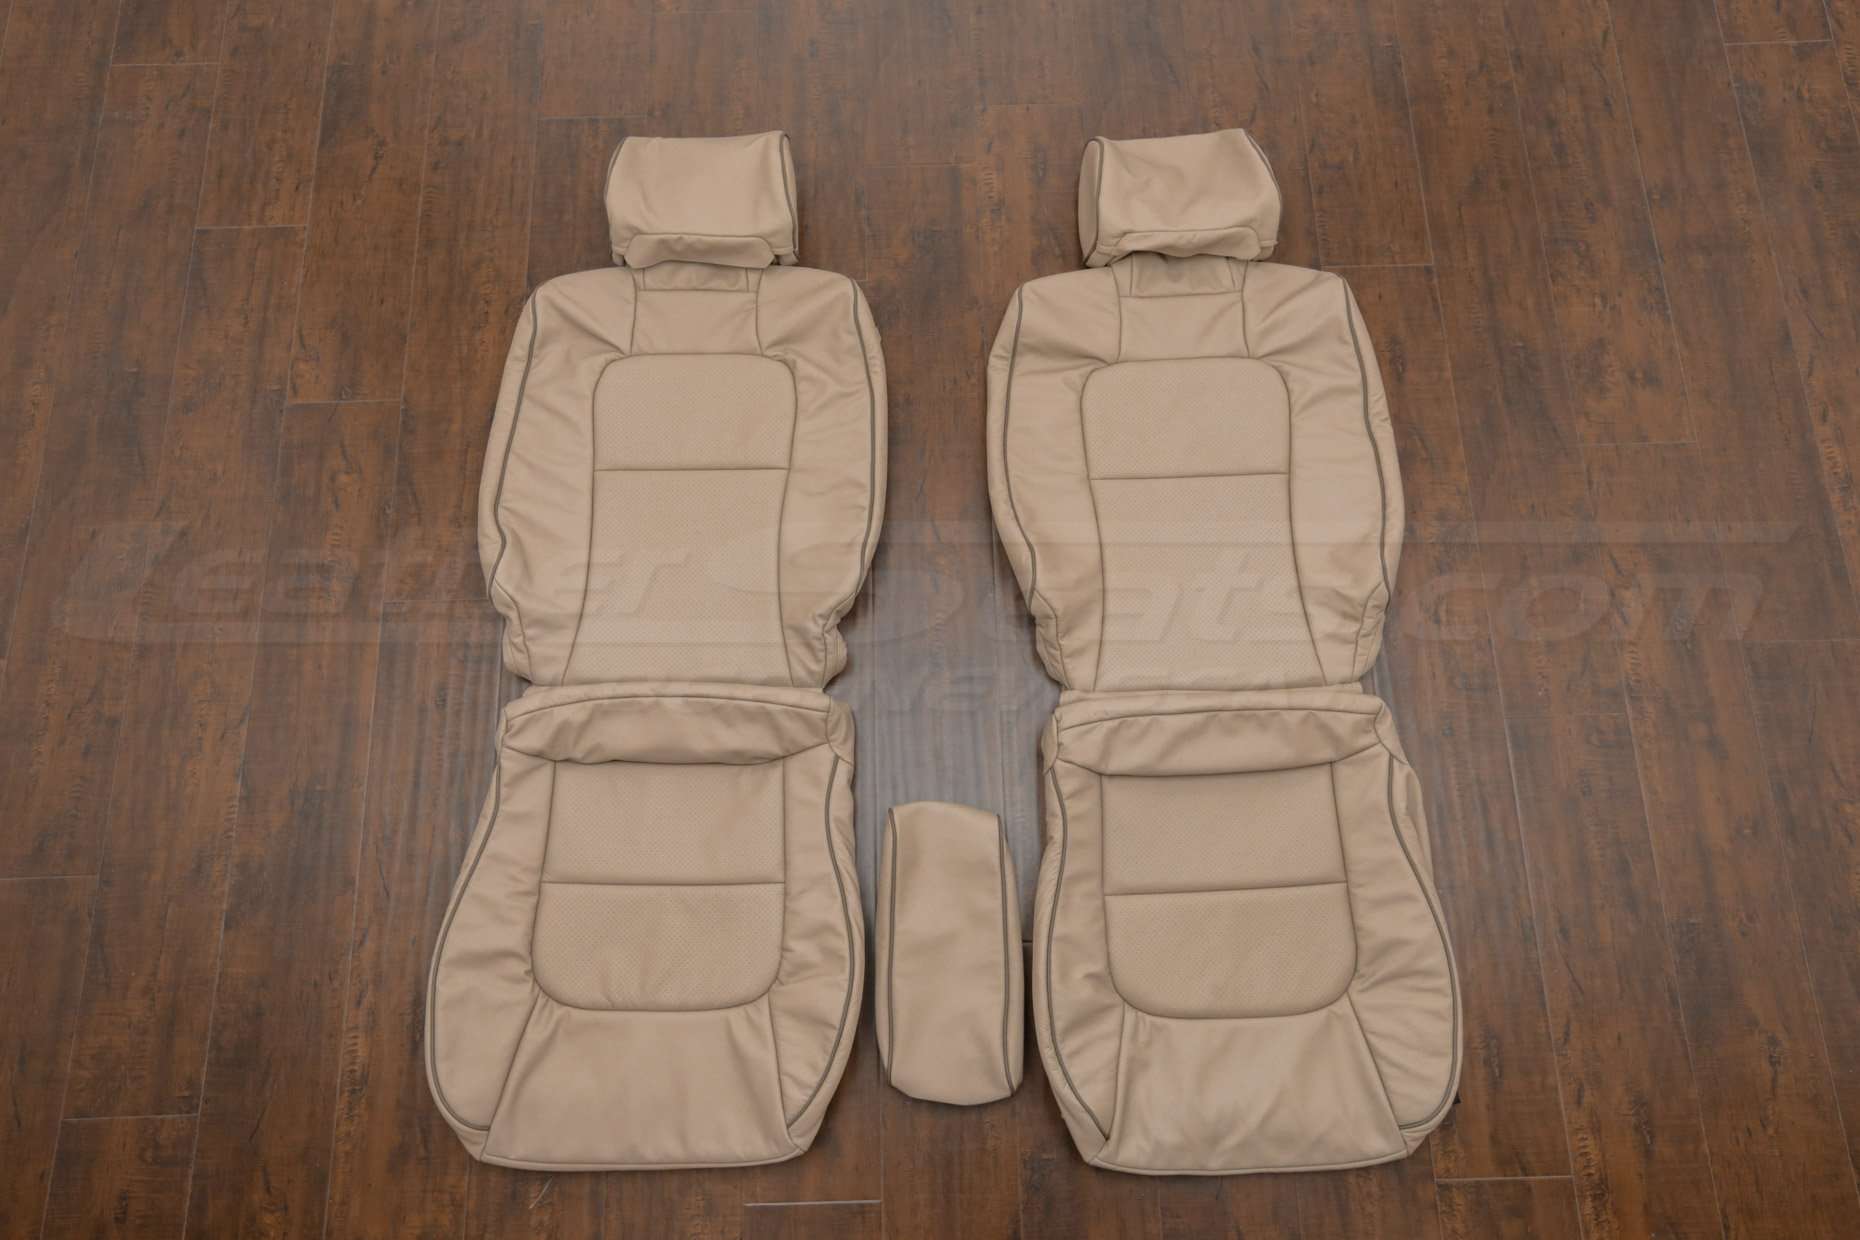 Lexus SC300/400 Leather Seat Kit - Adobe - Front seat upholstery w/ console cover